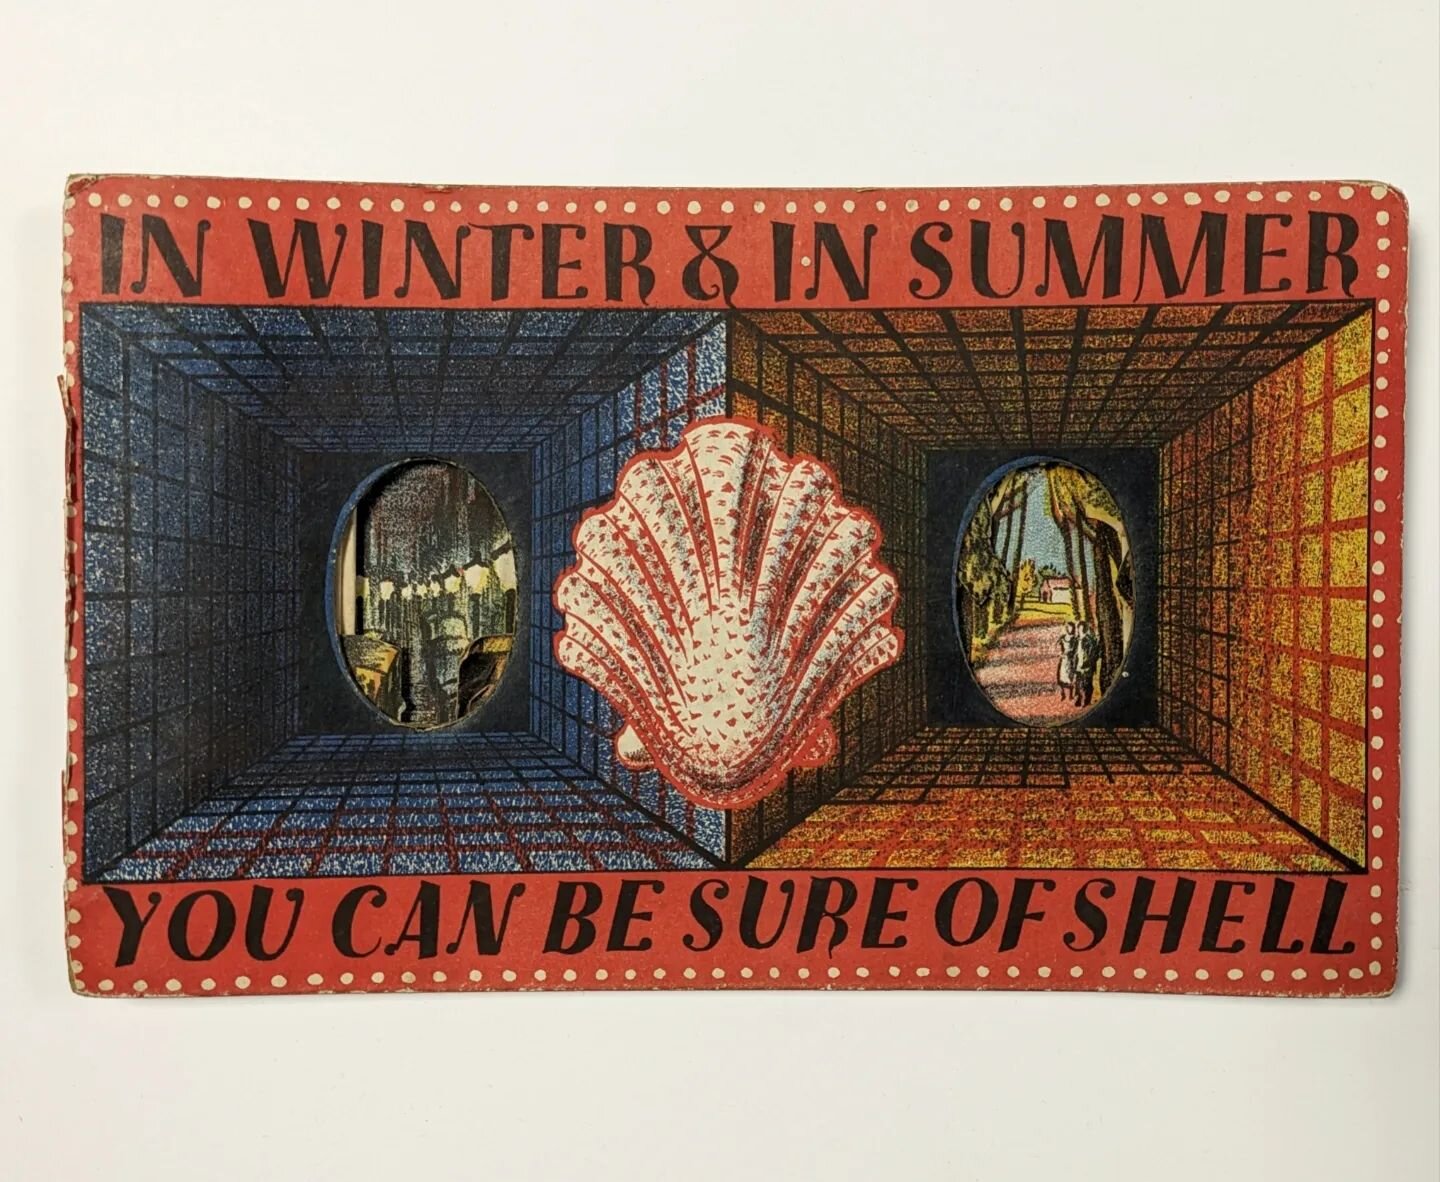 .
A rare 1930s Shell advertising peep-show &quot;In Winter &amp; In Summer You Can Be Sure Of Shell&quot; / &quot;Be Up To Date Shellubricate&quot;,
designed by Barnett Freedman &amp; published by Vincent Brooks, Day and Son, 1935.

Included in our 3